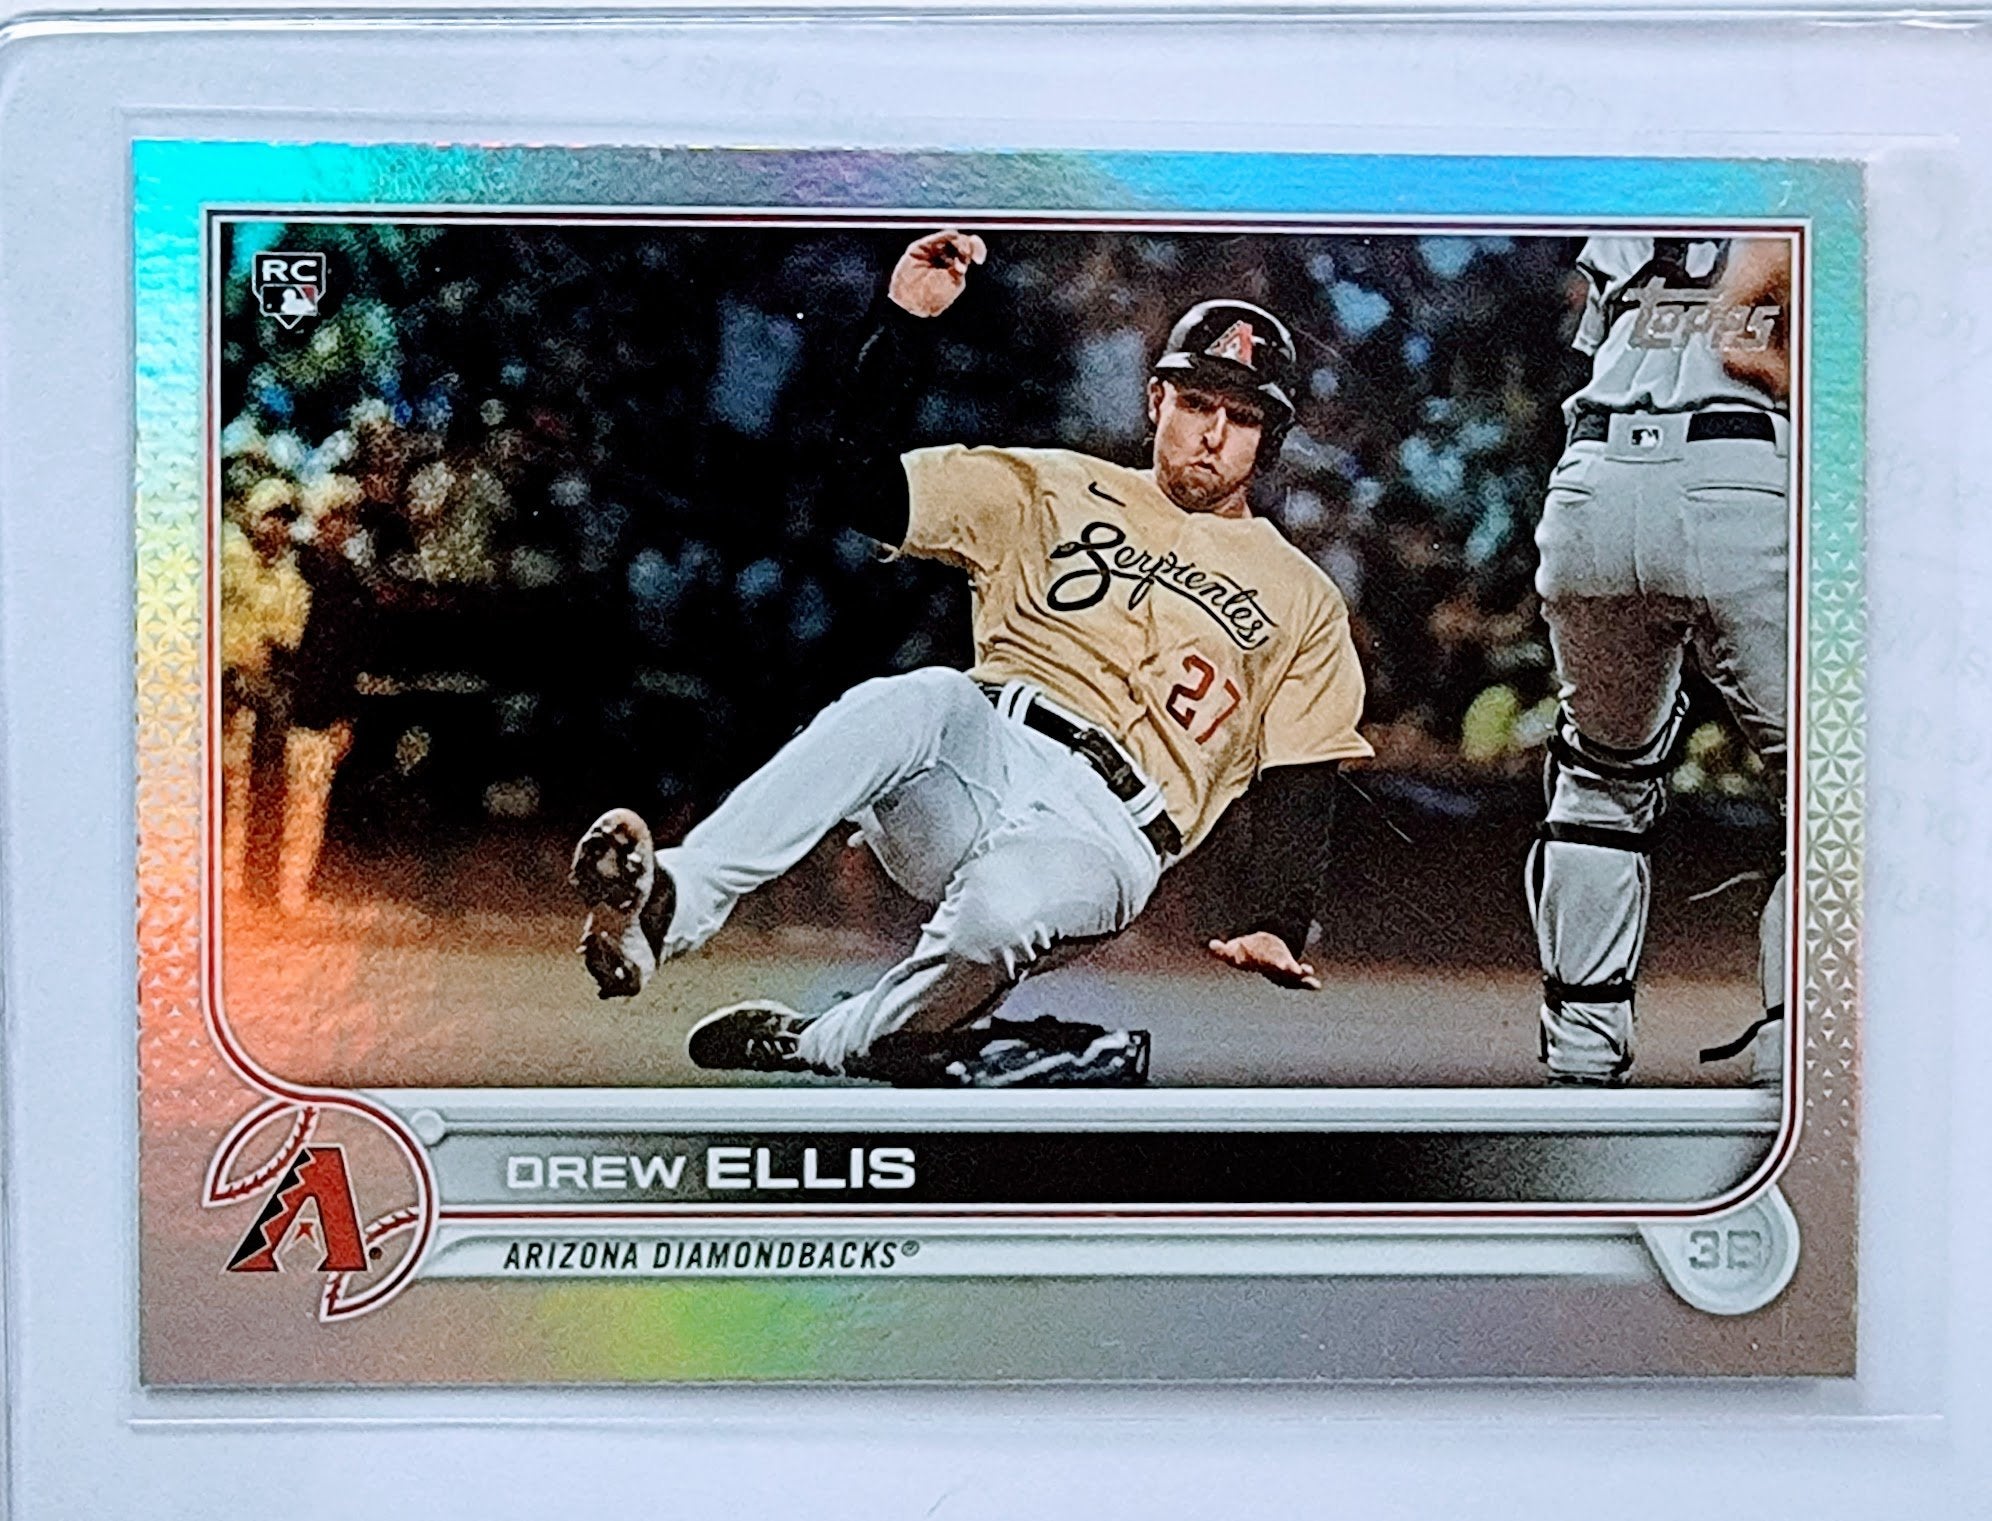 2022 Topps Drew Ellis Seattle Mariners Foil Refractor Baseball Trading Card GRB1 simple Xclusive Collectibles   